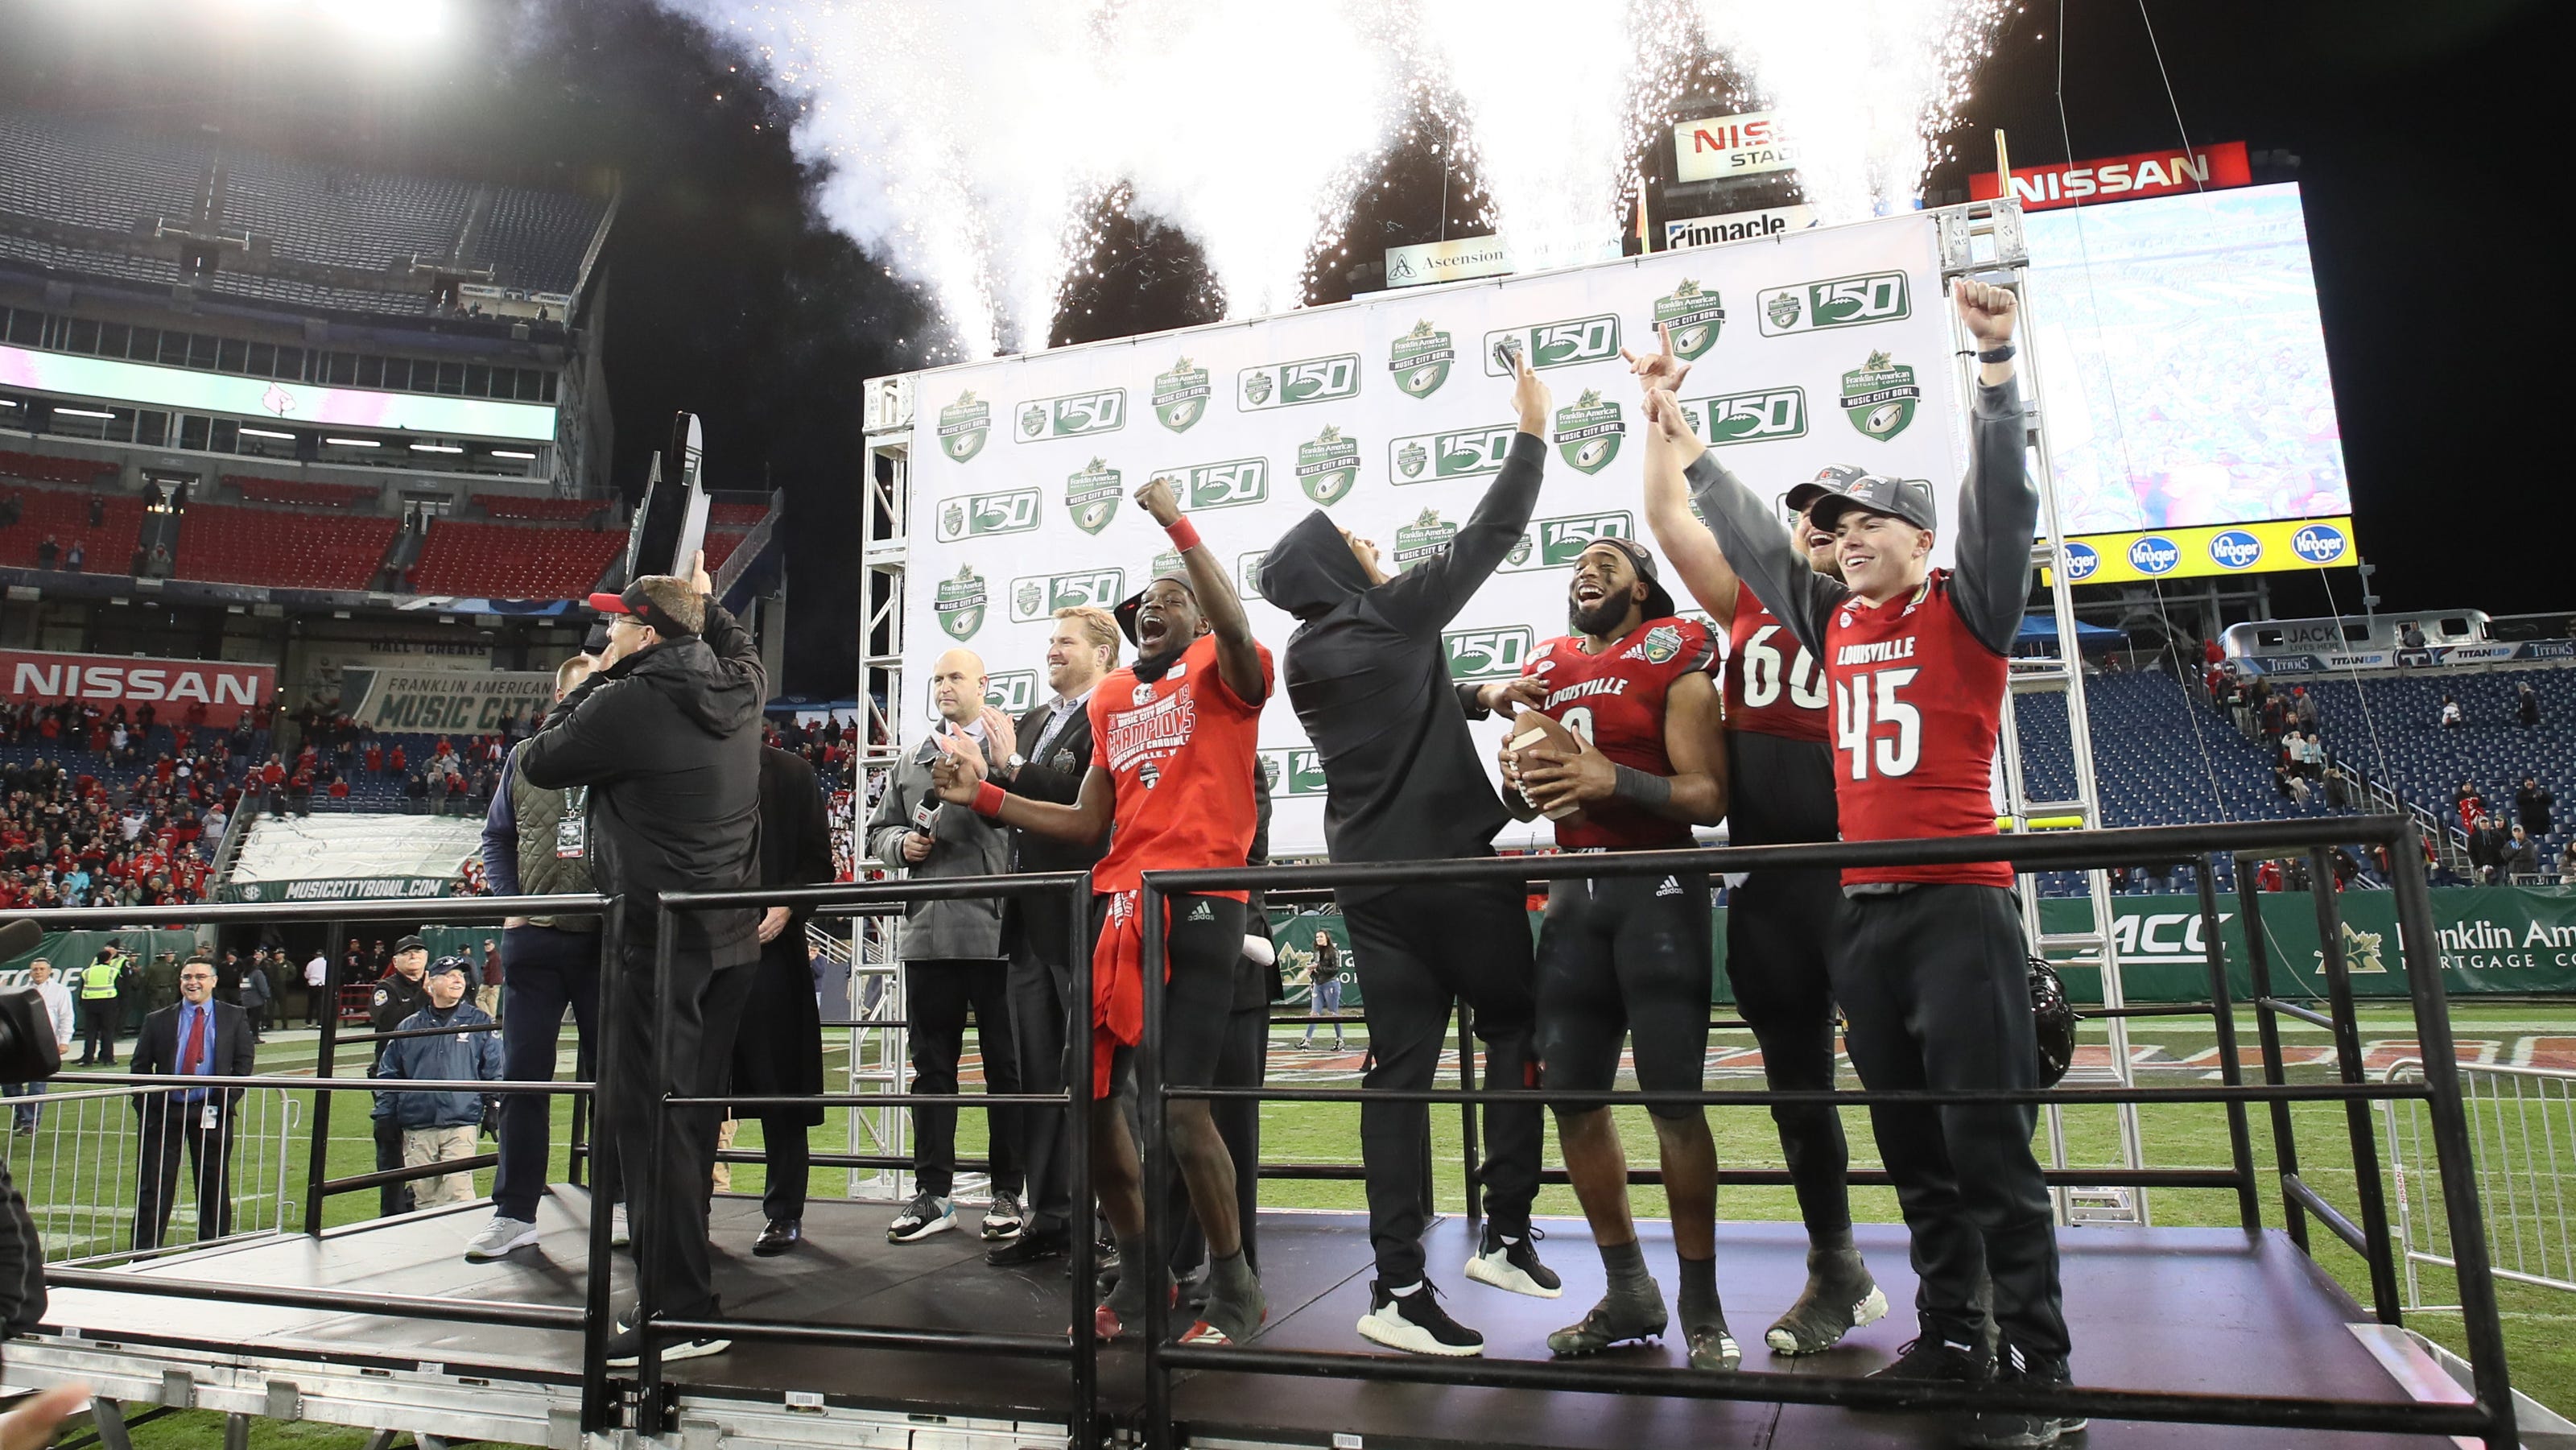 Louisville football: A look at the 2020 season after ACC changes